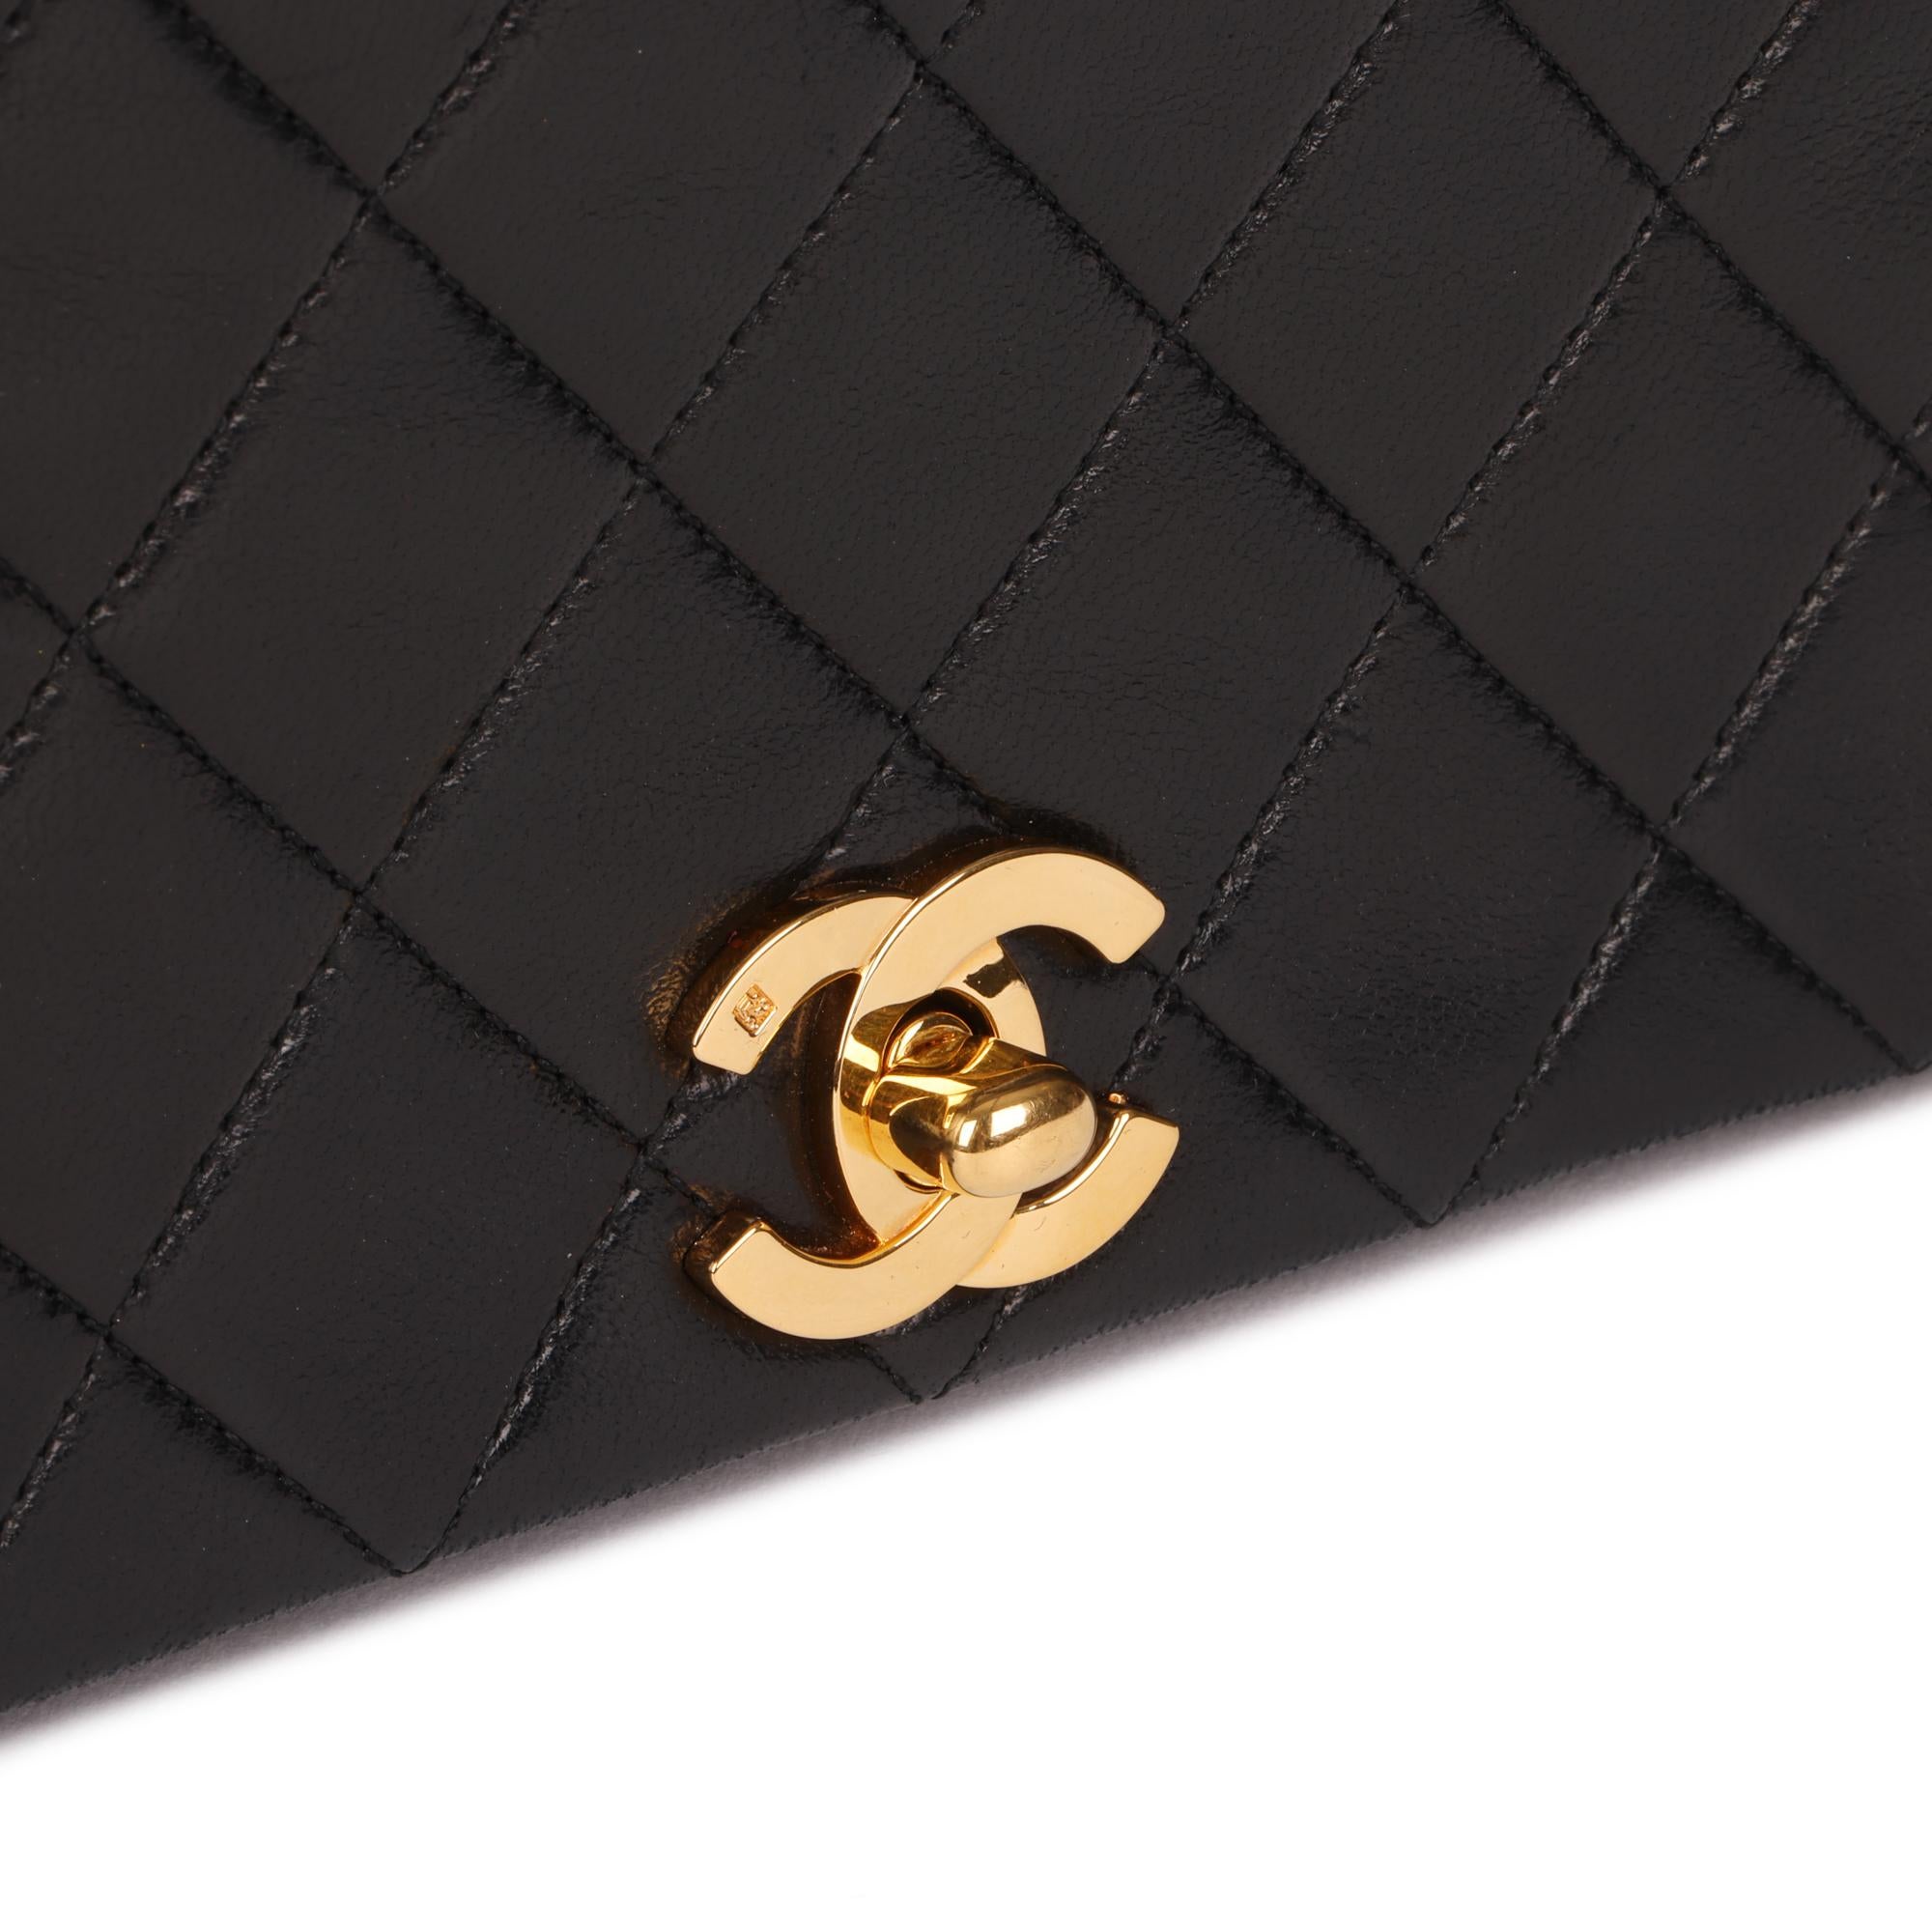 CHANEL
Black Quilted Lambskin Vintage Small Classic Single Full Flap Bag

Xupes Reference: HB4139
Serial Number: 1383771
Age (Circa): 1991
Accompanied By: Chanel Dust Bag
Authenticity Details:  Serial Sticker (Made in France) 
Gender: Ladies
Type: